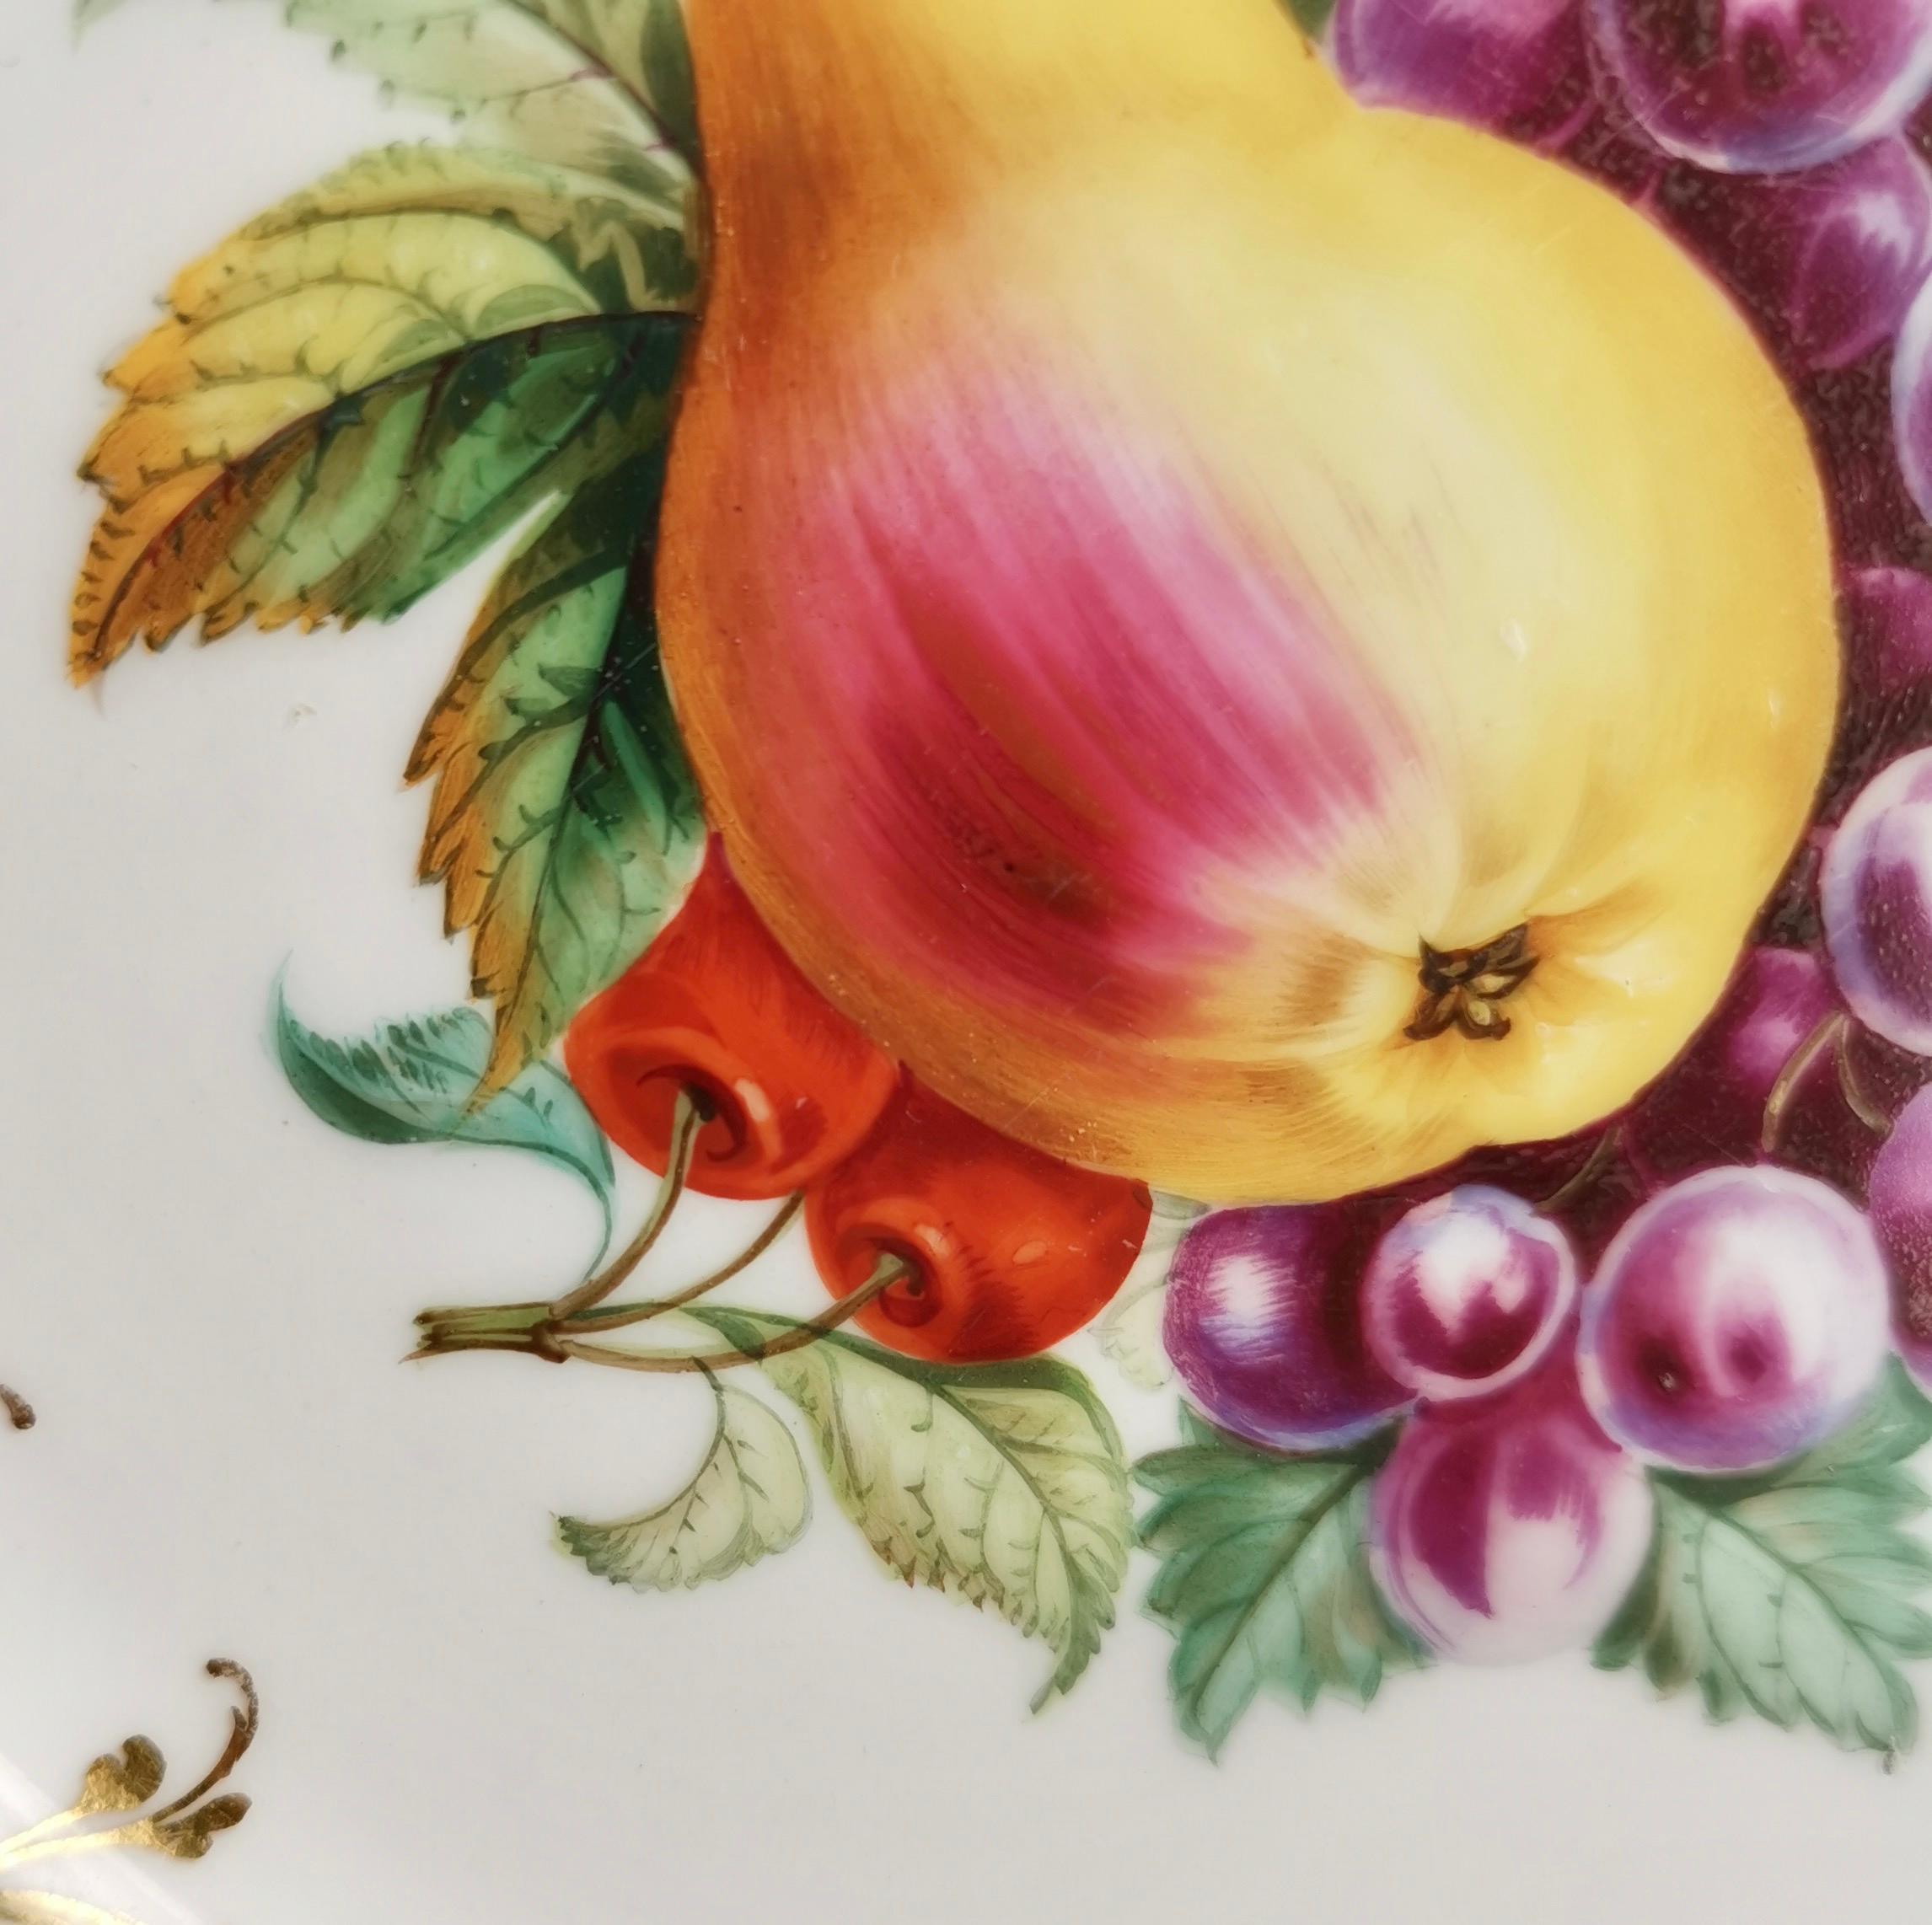 Porcelain Ridgway Plate, Emerald Green, Gilt and Sublime Hand Painted Fruits, ca 1853